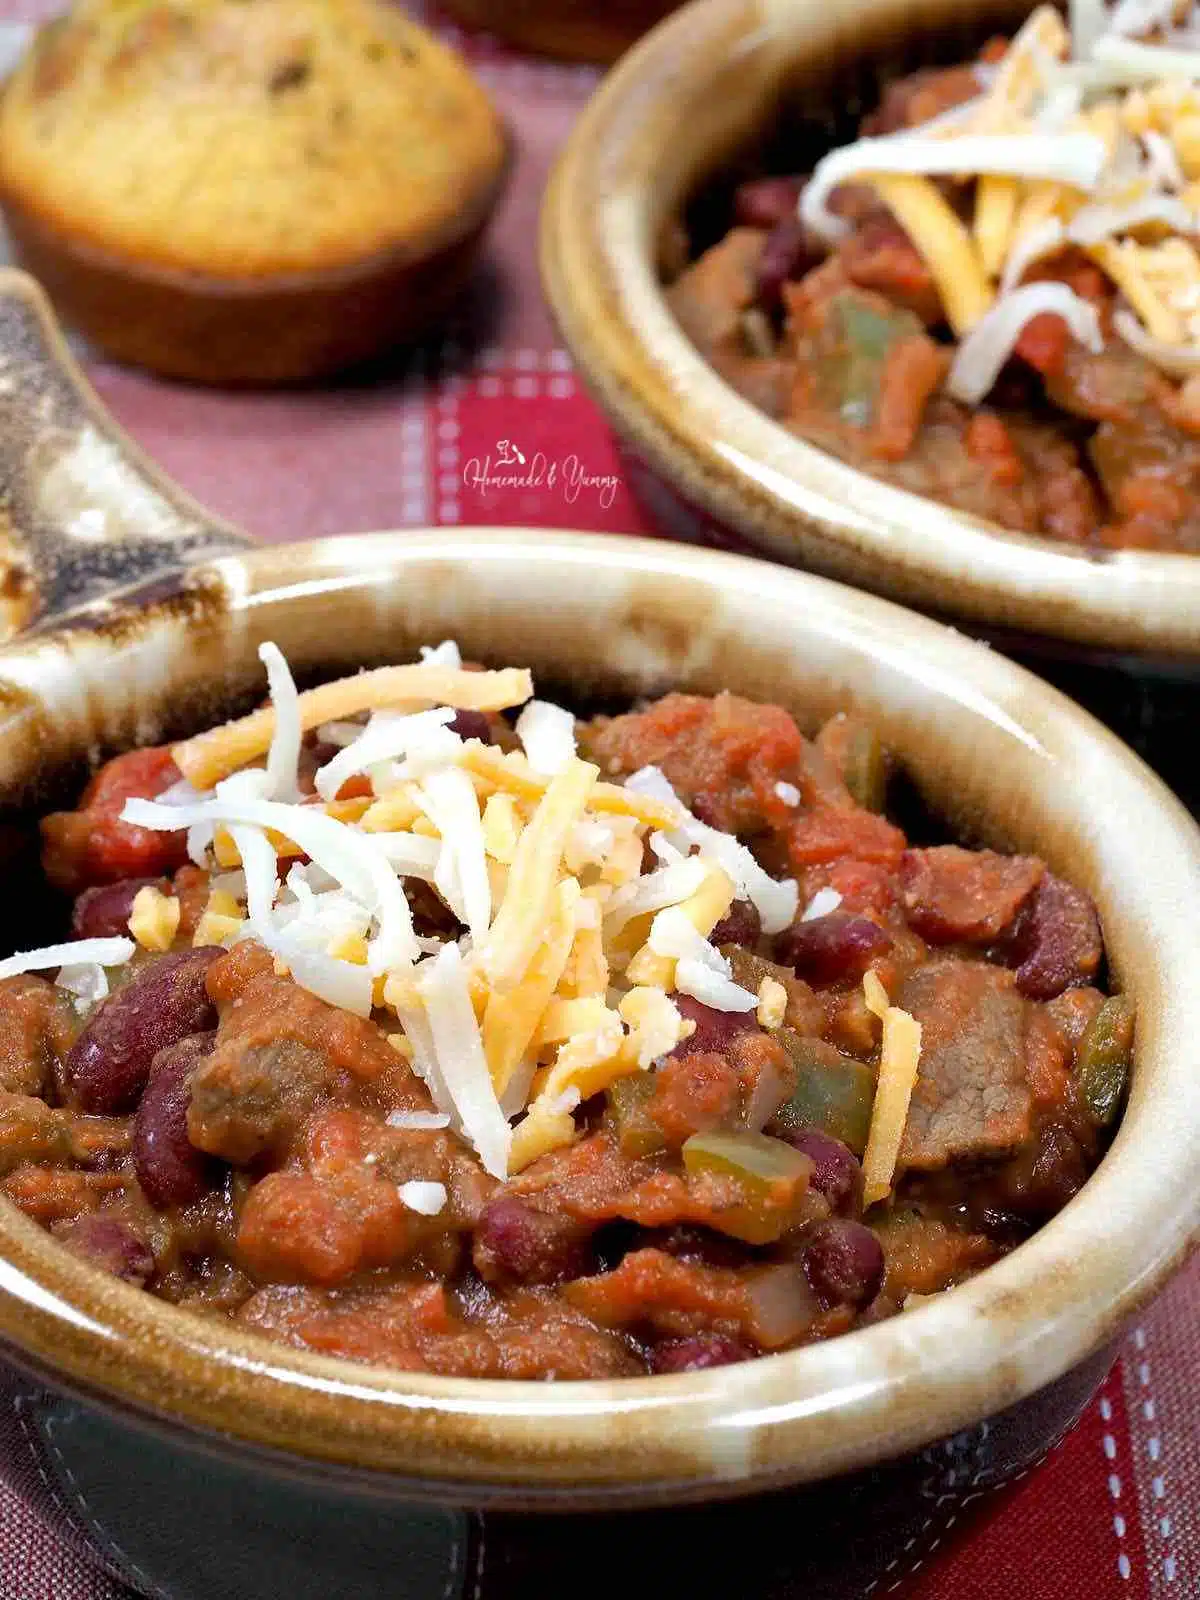 Game day chili recipe with steak, peppers and beans.